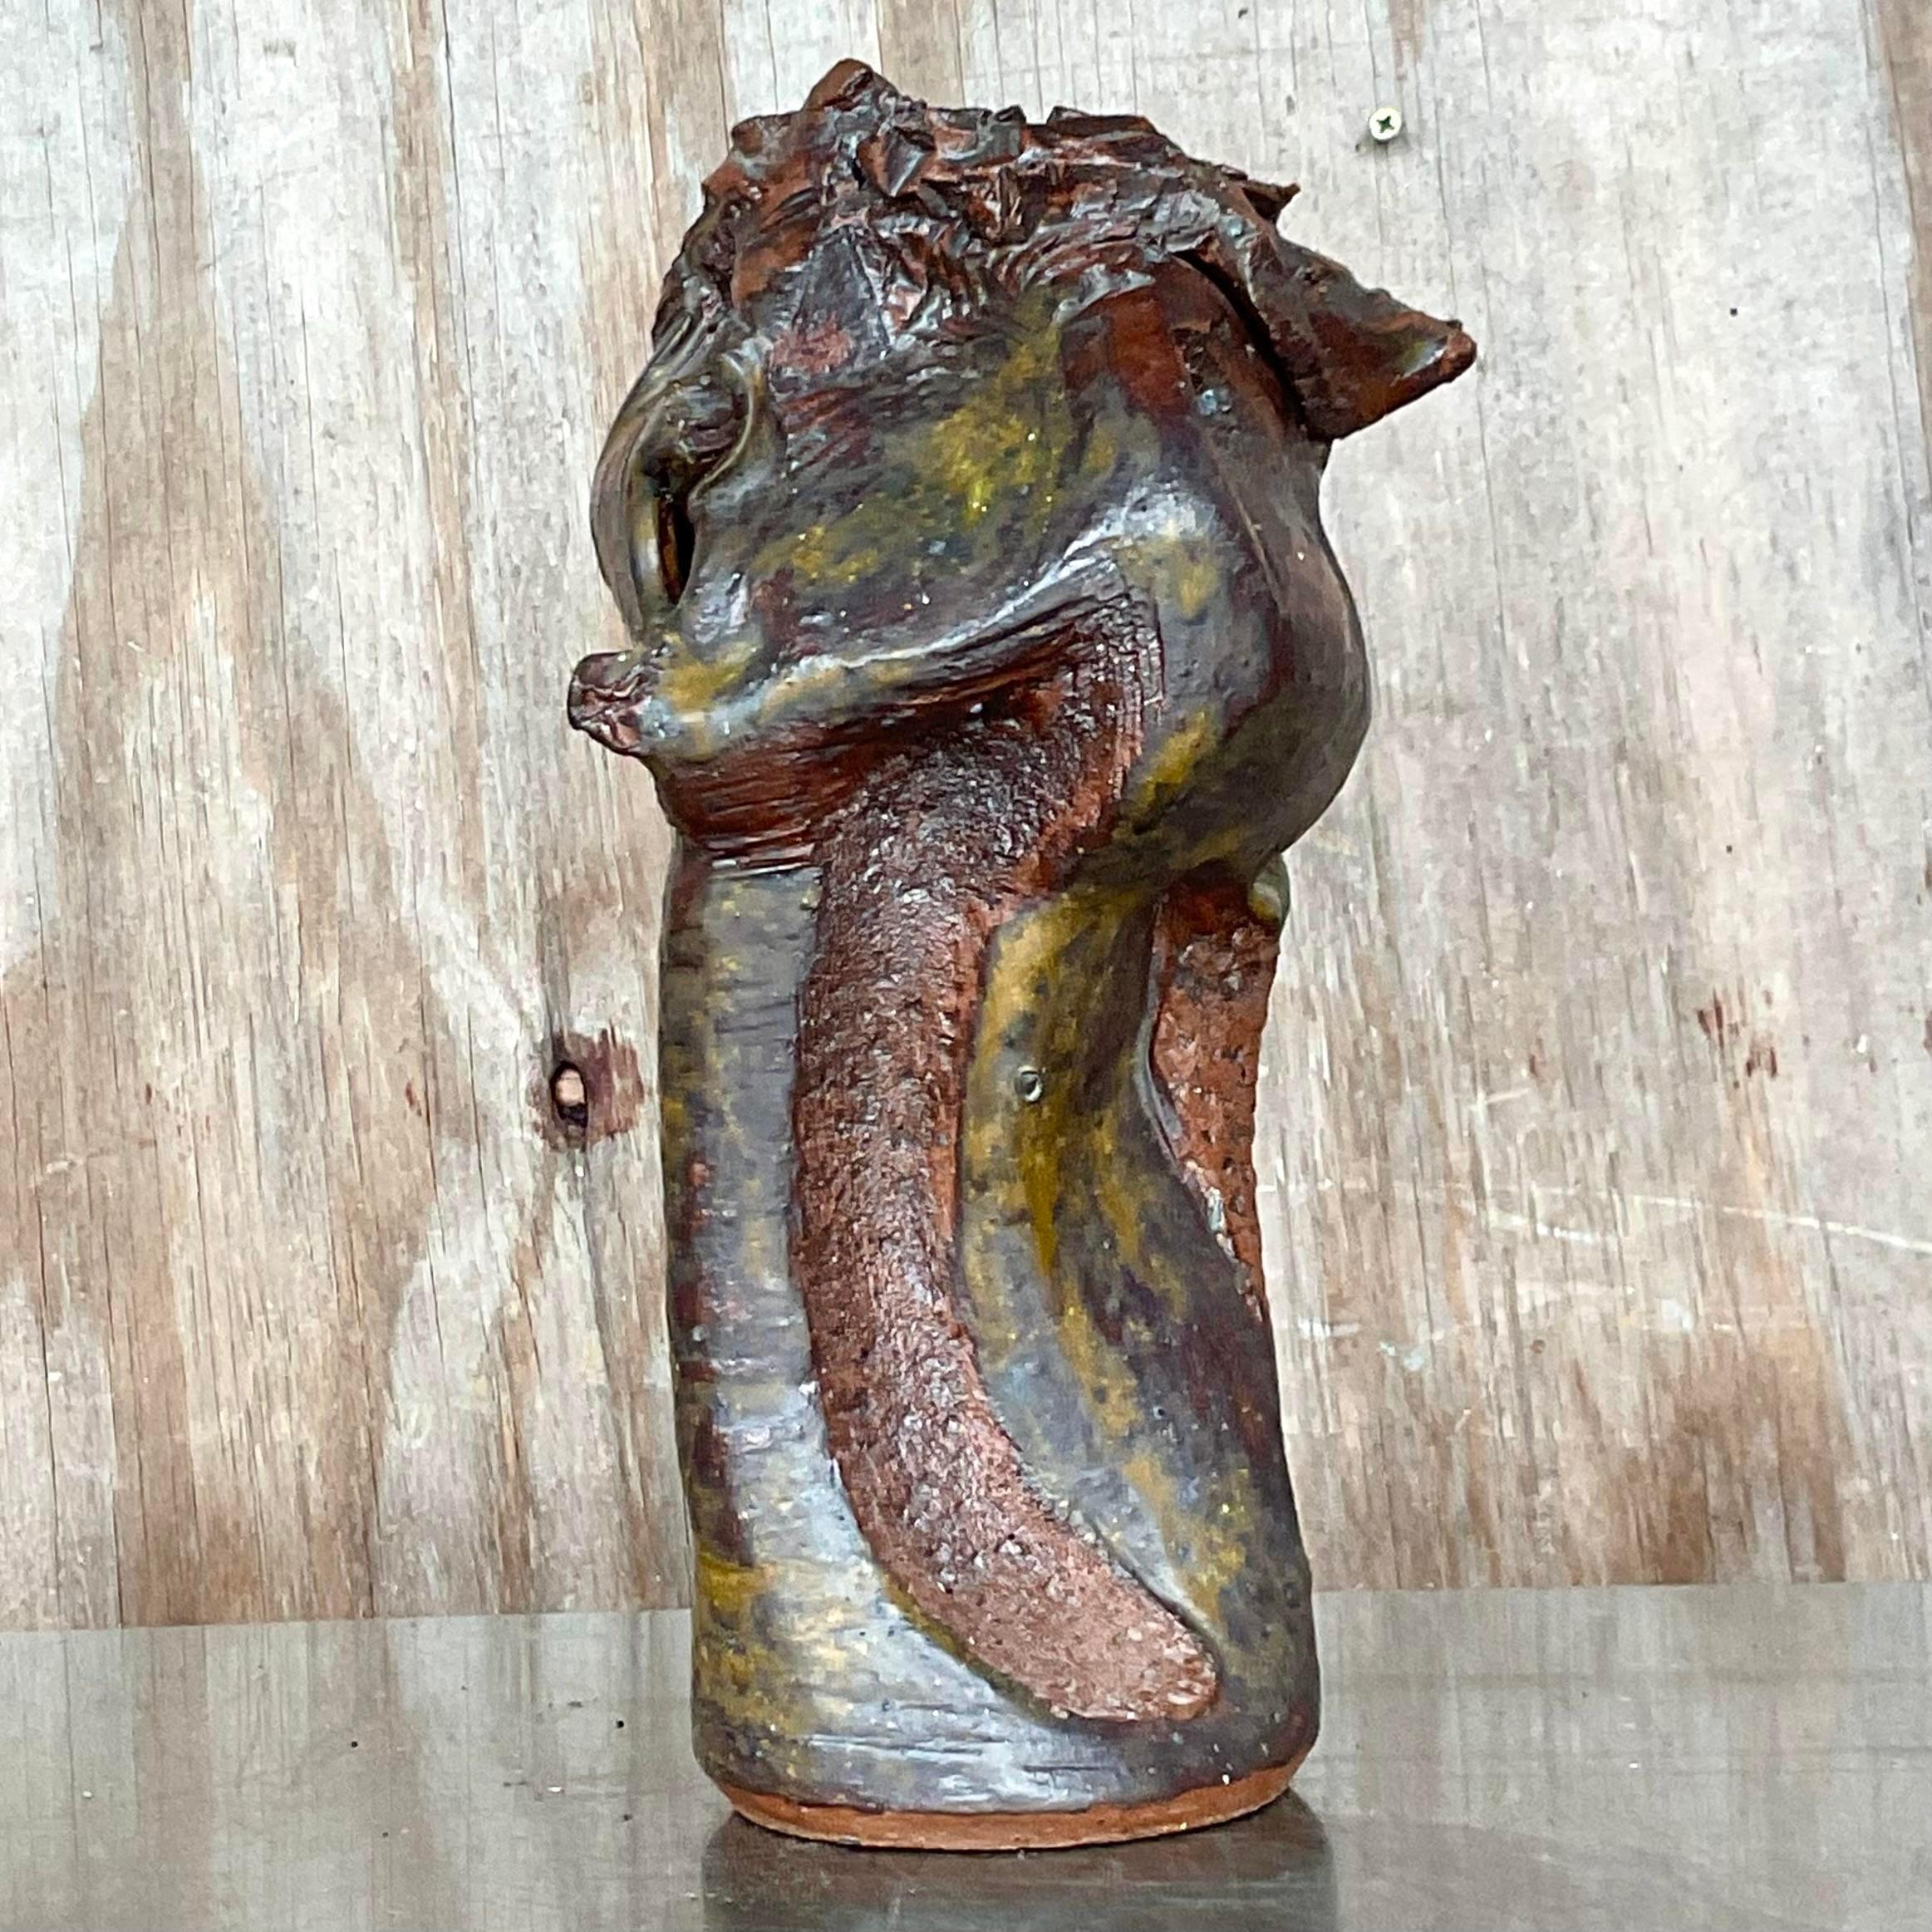 The most incredible vintage Boho studio pottery vase. A chic Abstract composition with lots of gnarly twists and turns. A combo of matte and glazed finishes. Signed on the bottom. Acquired from a Palm Beach estate.